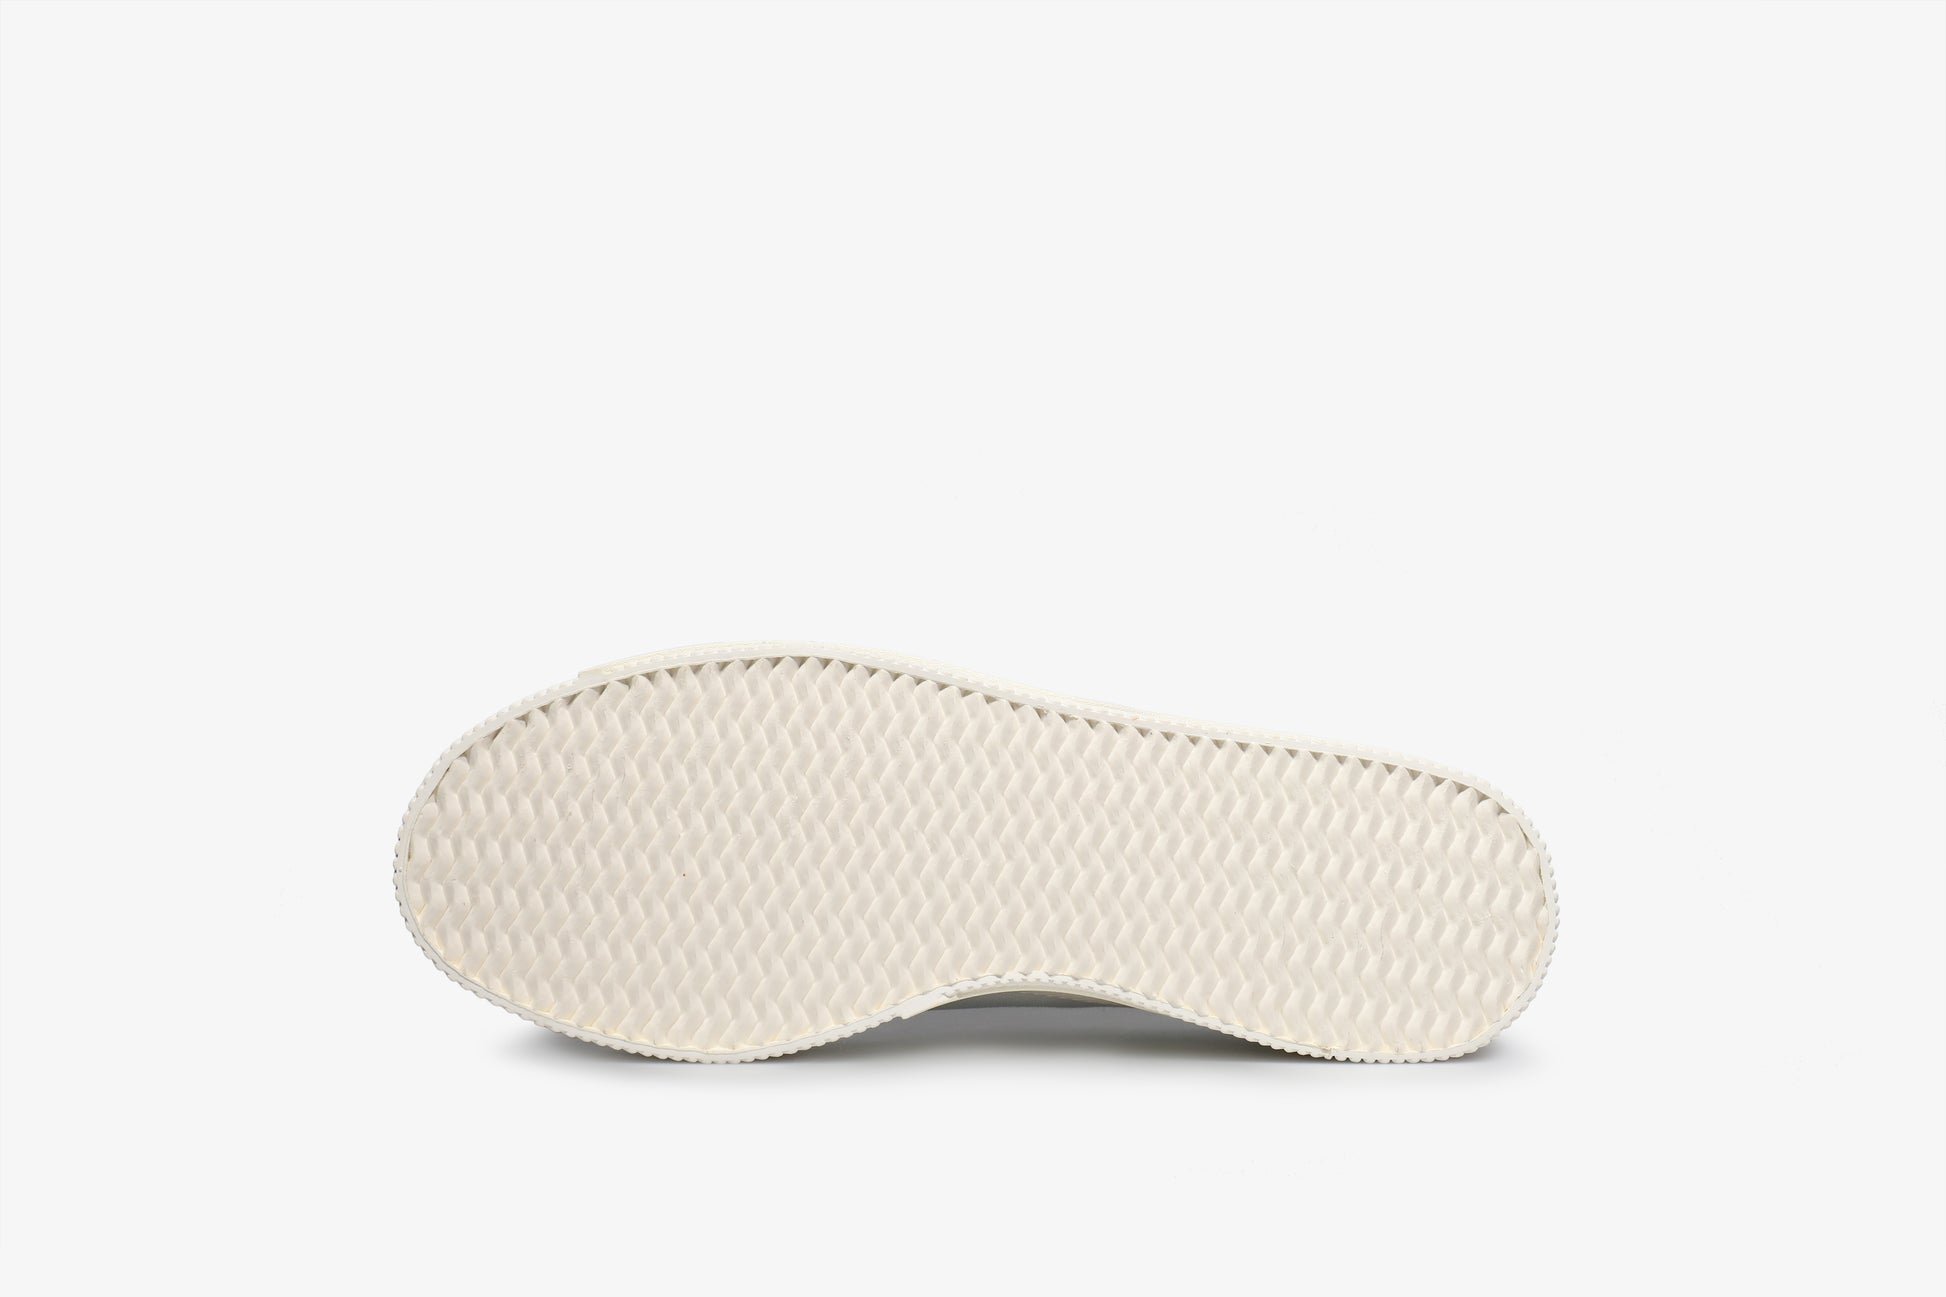 yeezy blush shoes for women on sale today